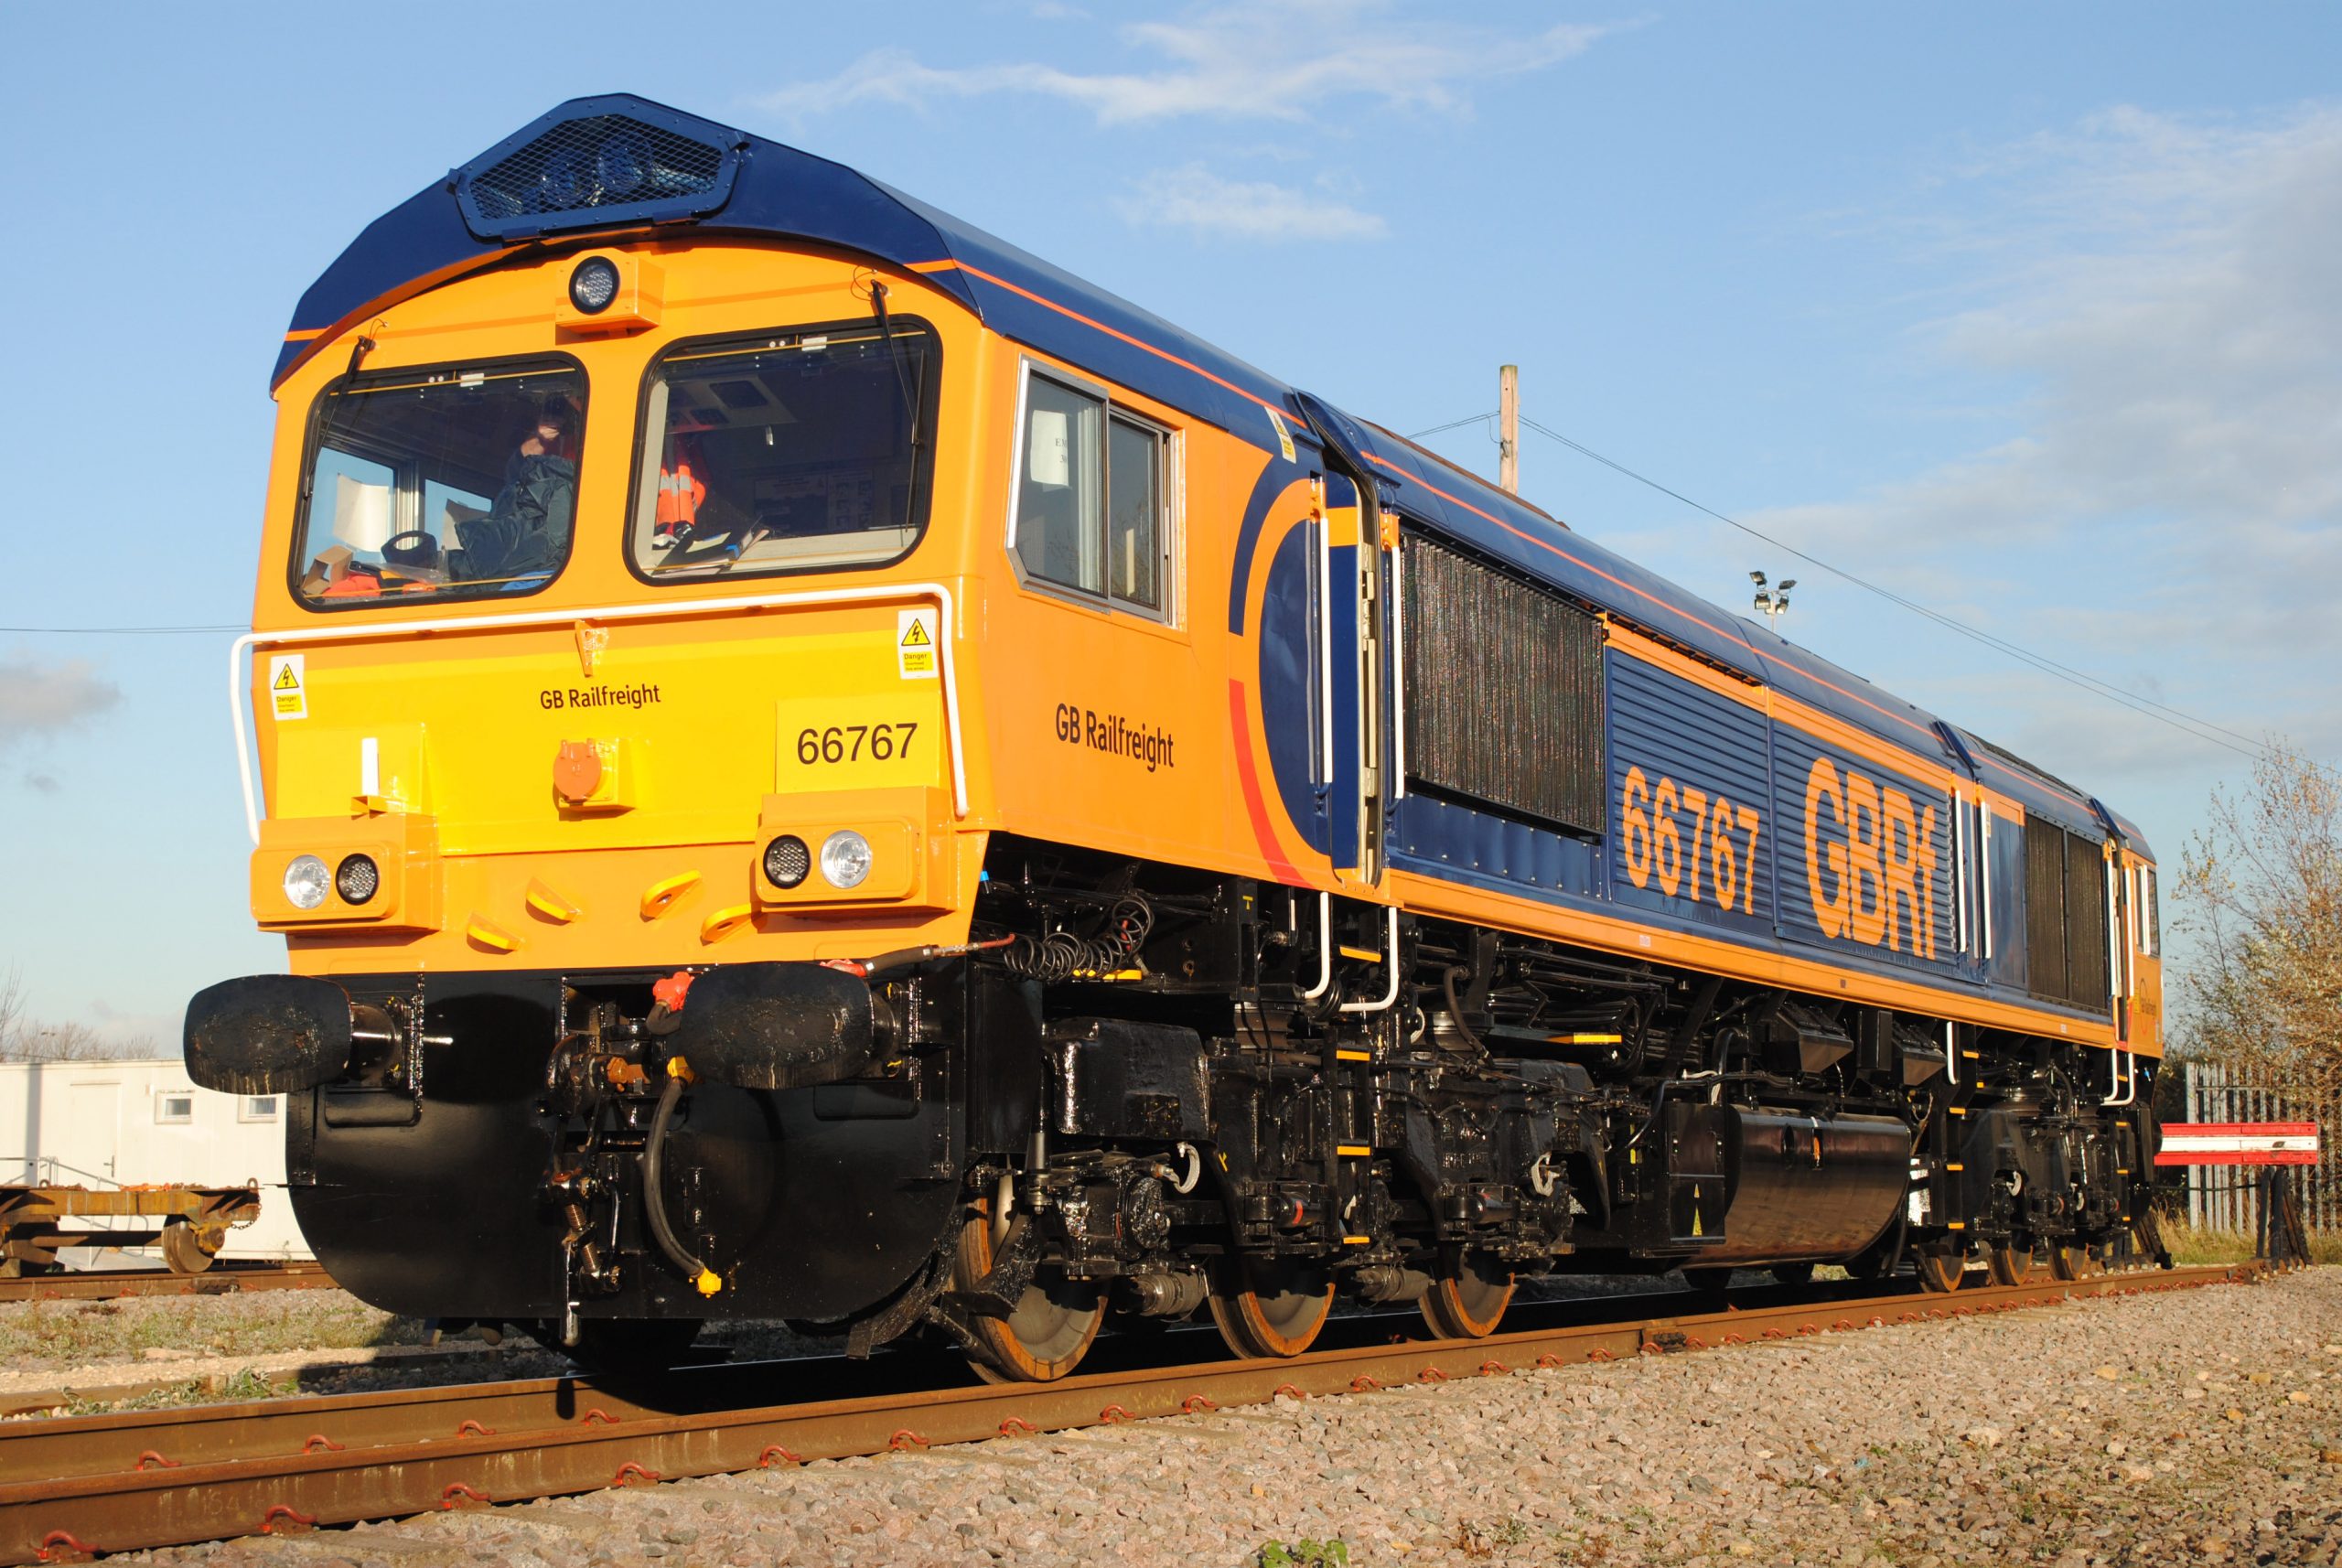 GB Railfreight renew contract with 3Squared for its RailSmart platform